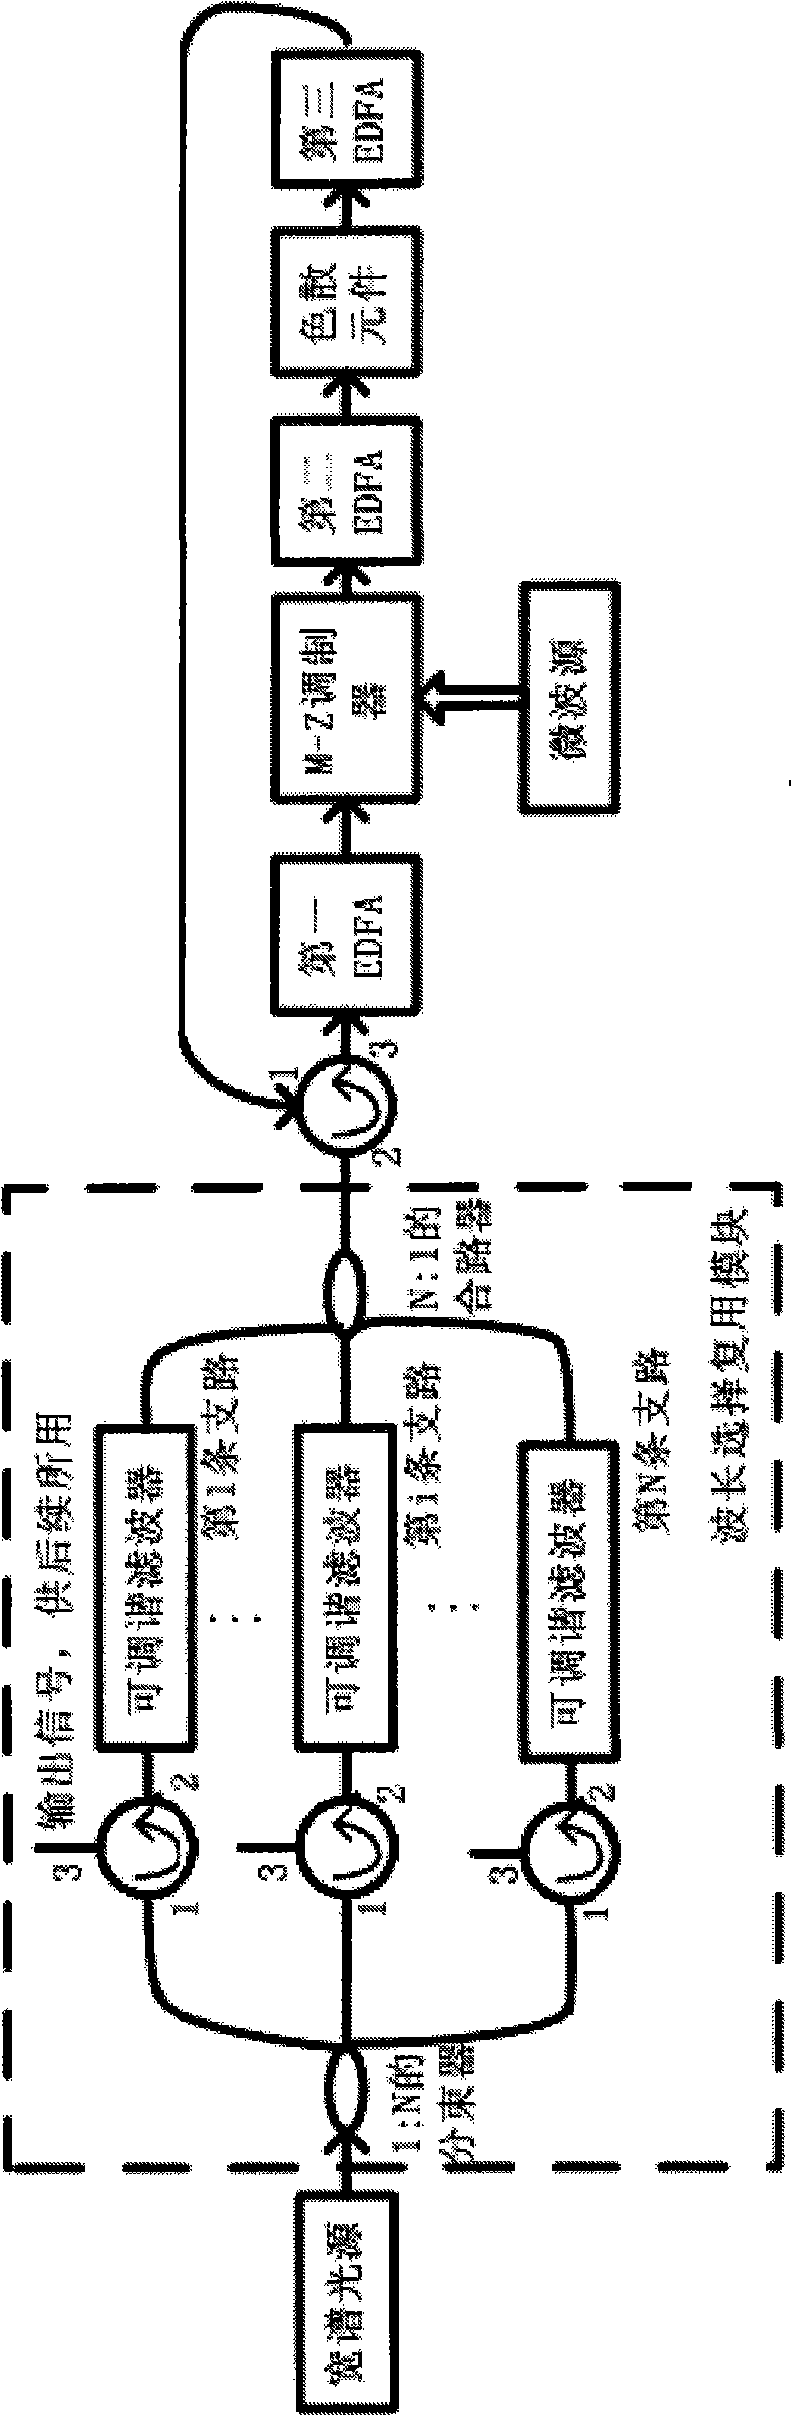 Filter feedback multiplexed millimeter wave subcarrier optical controlled microwave beam forming network